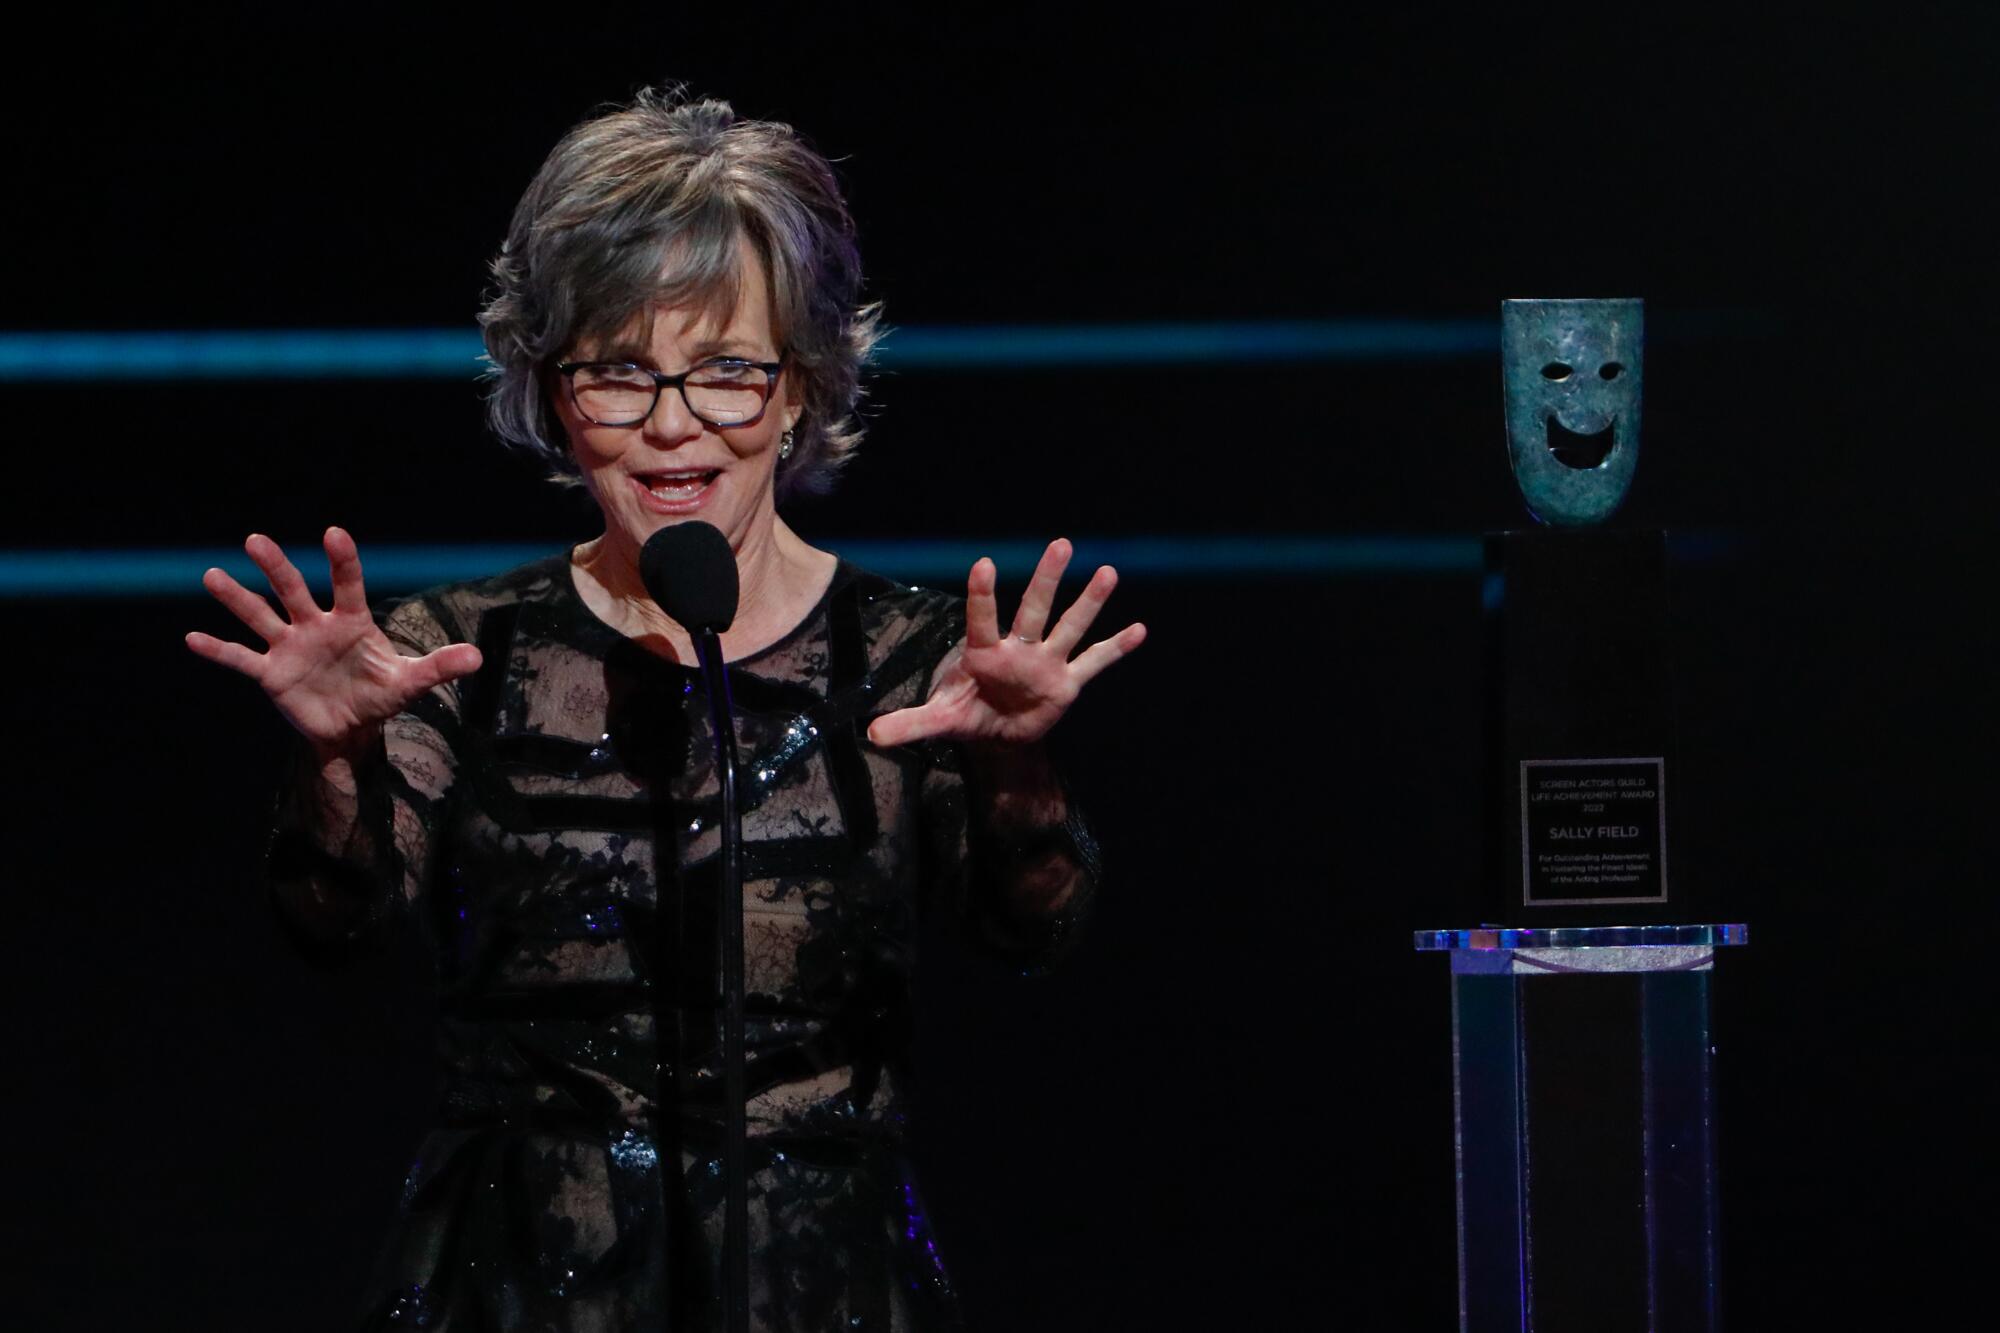 Sally Field accepts the Life Achievement Award at the Screen Actors Guild Awards: "Easy is overrated."